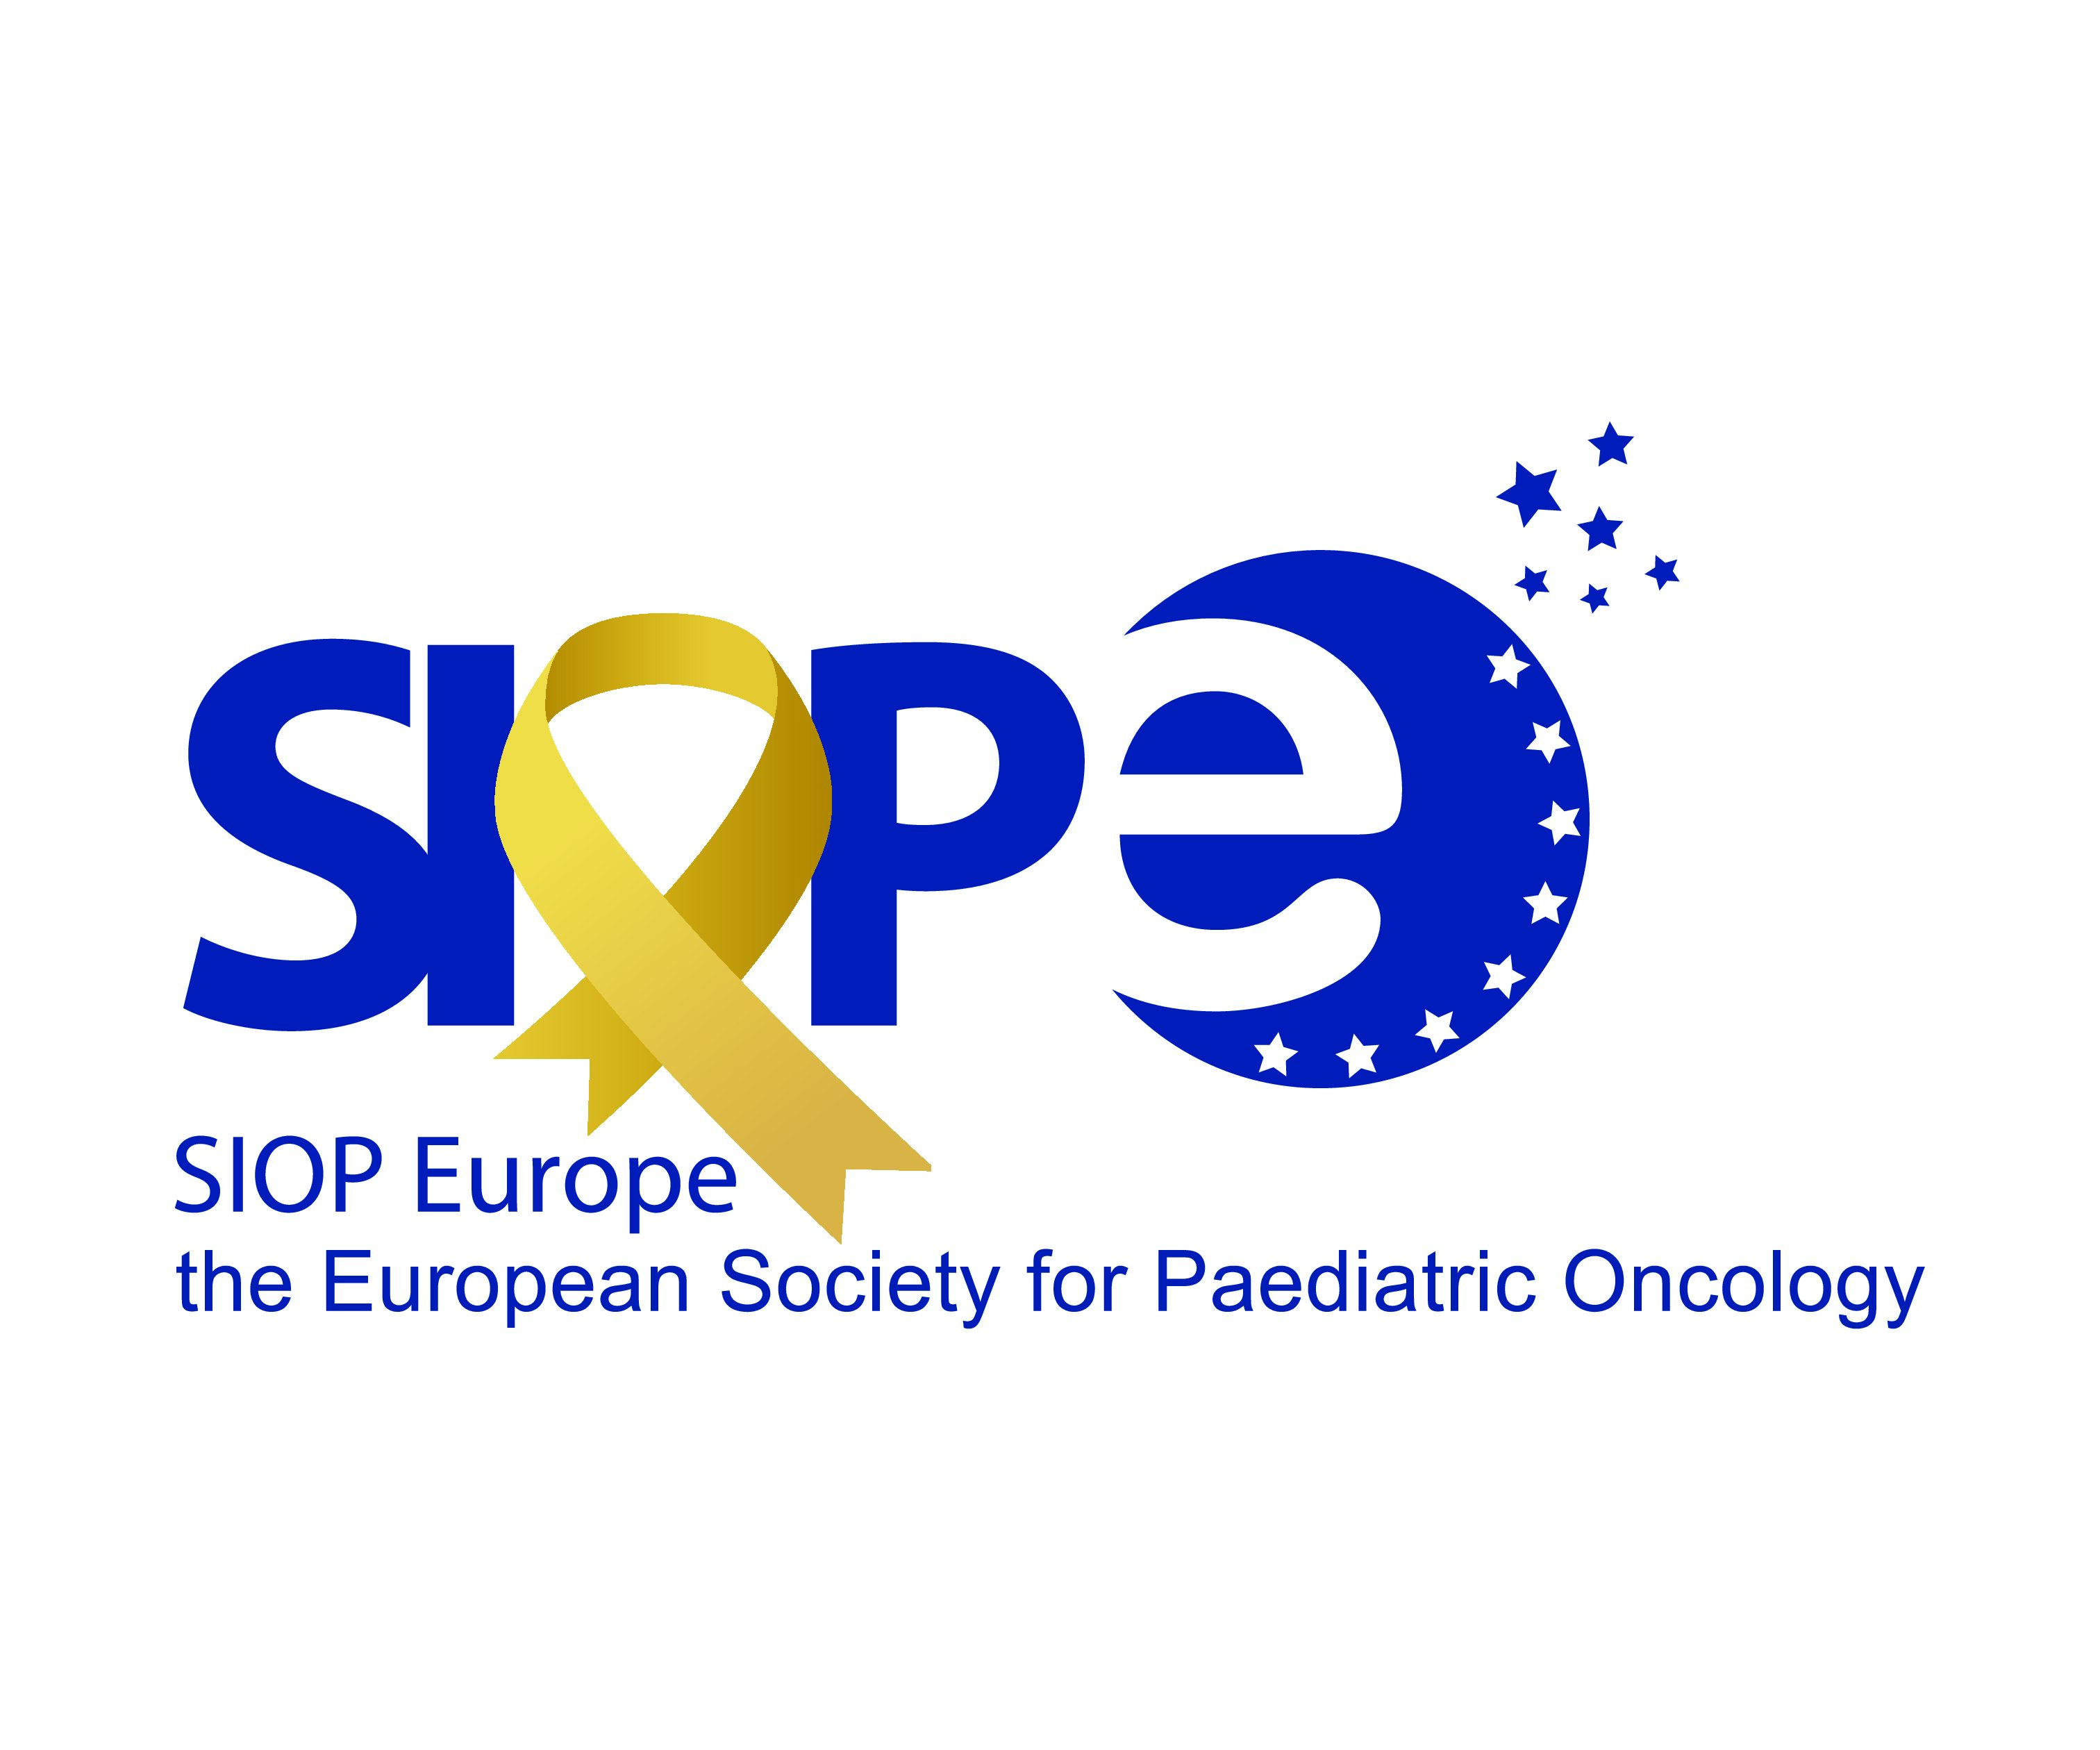 The European Society for Paediatric Oncology (SIOP Europe)